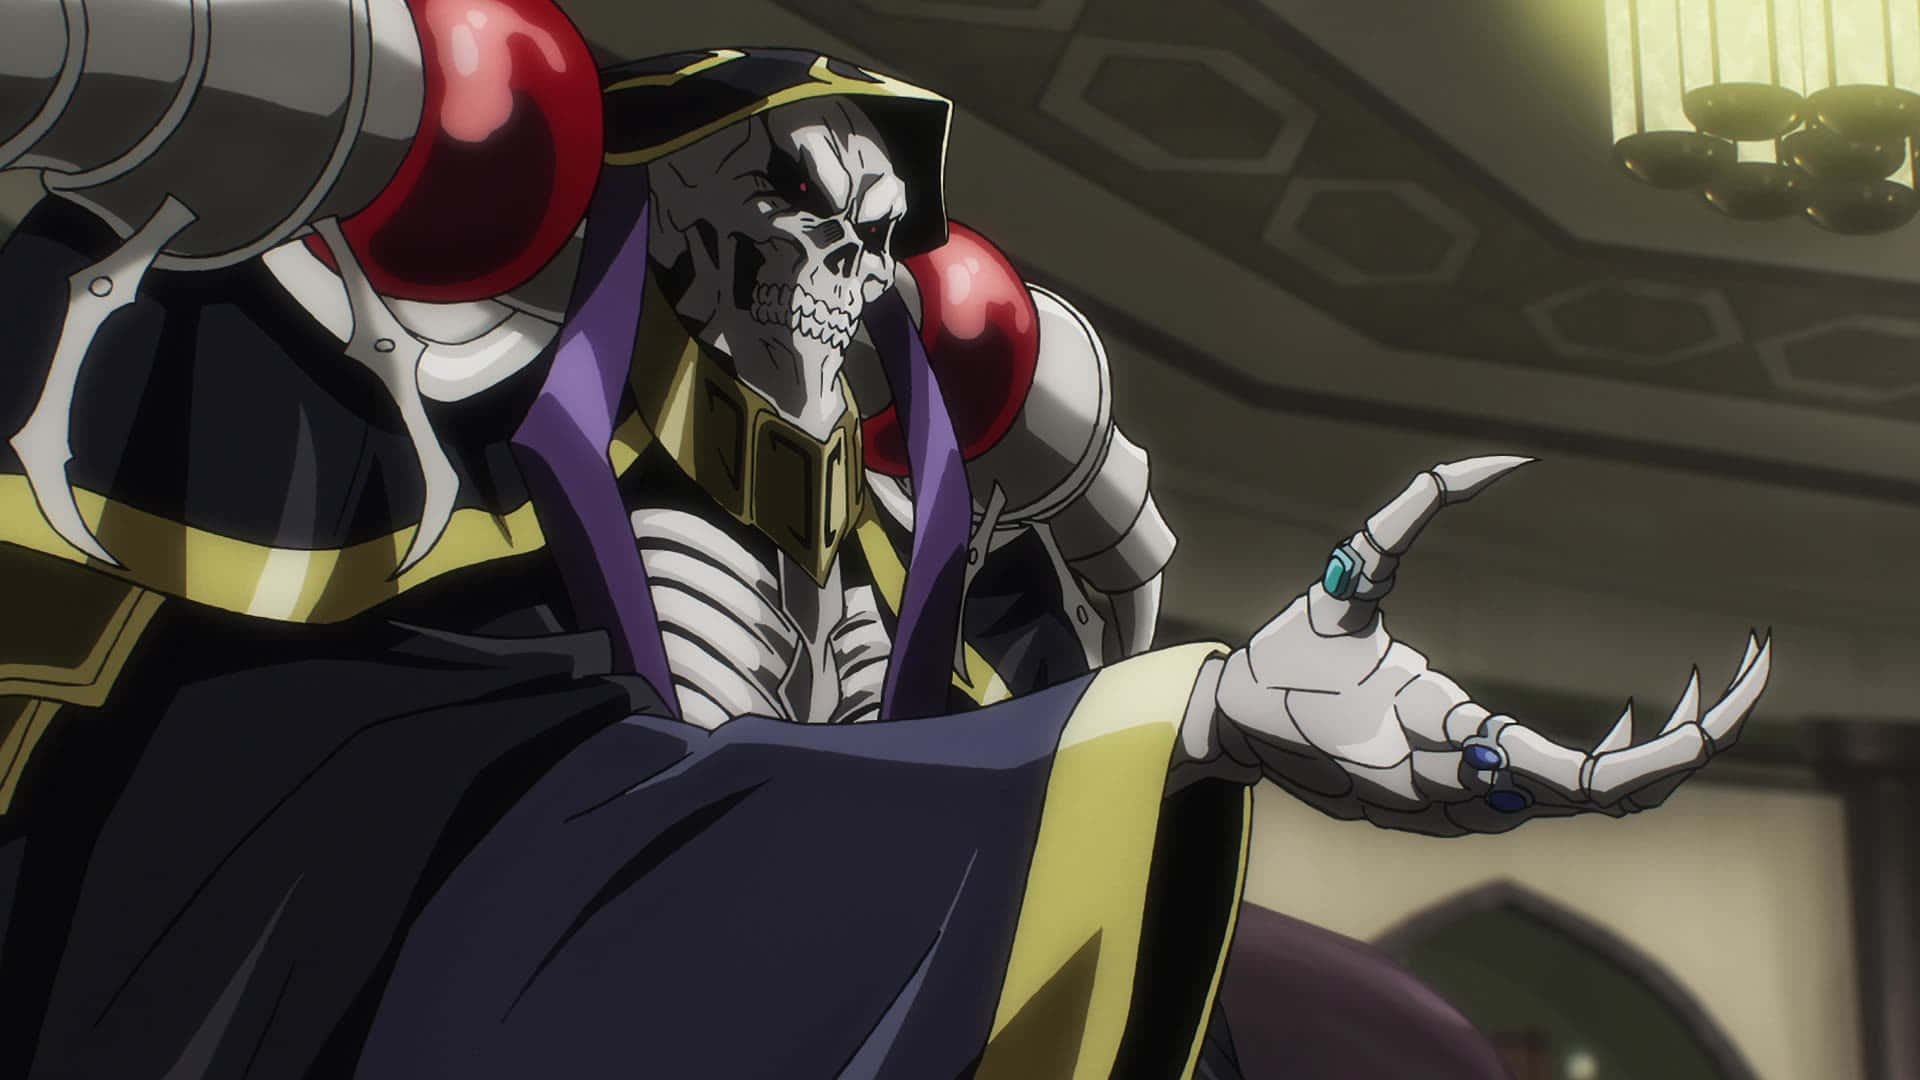 Overlord Ainz Ooal Gown Edgy Arm Billede.